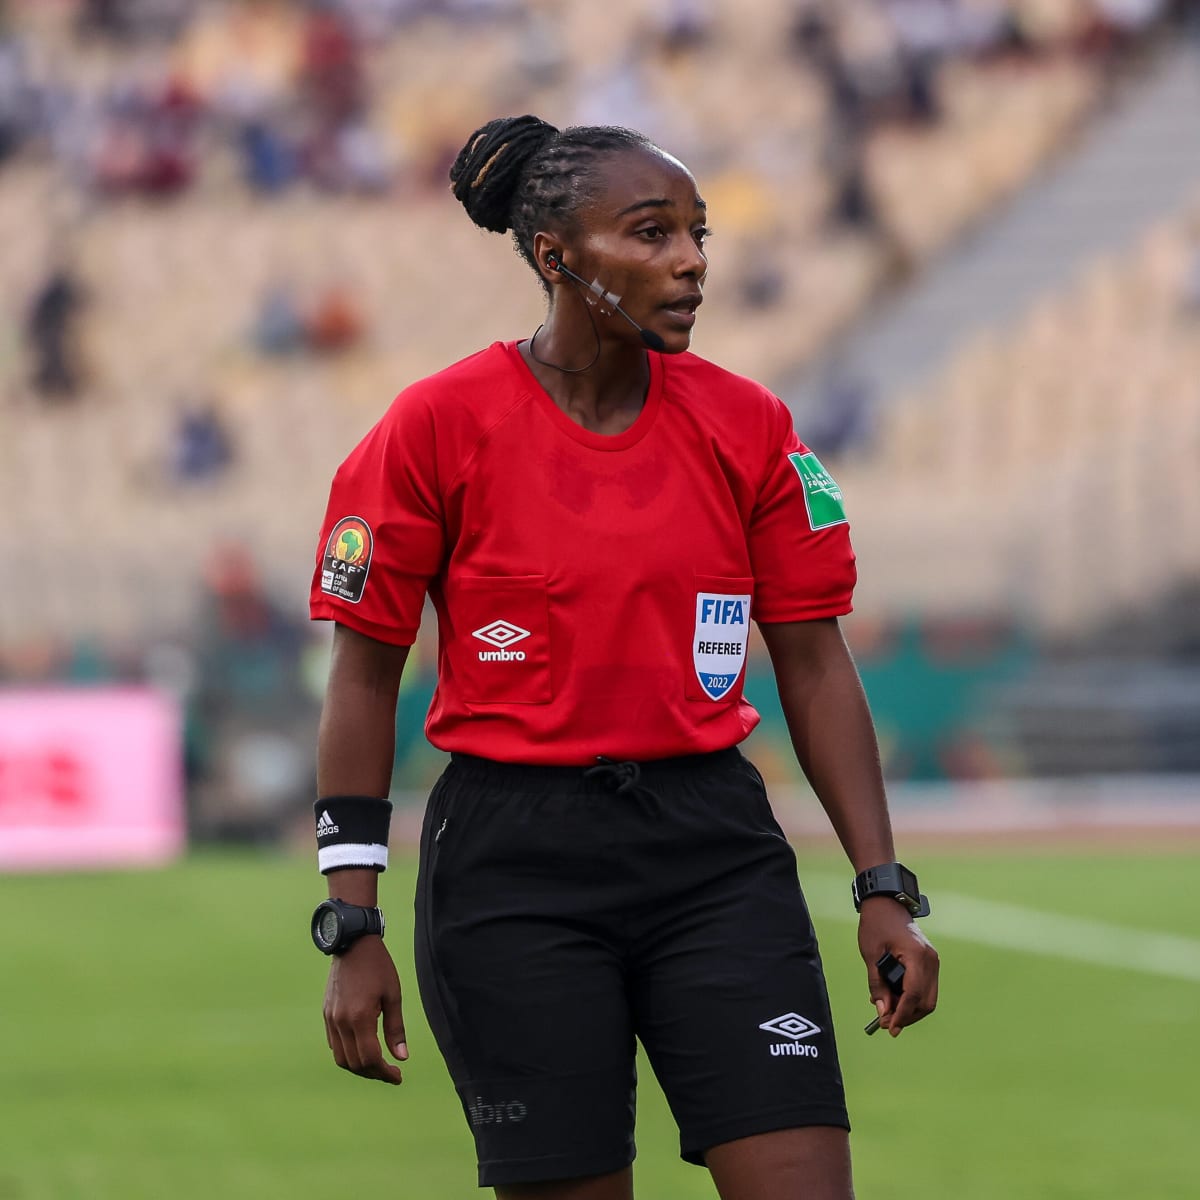 Three female referees selected for 2022 FIFA World Cup in Qatar